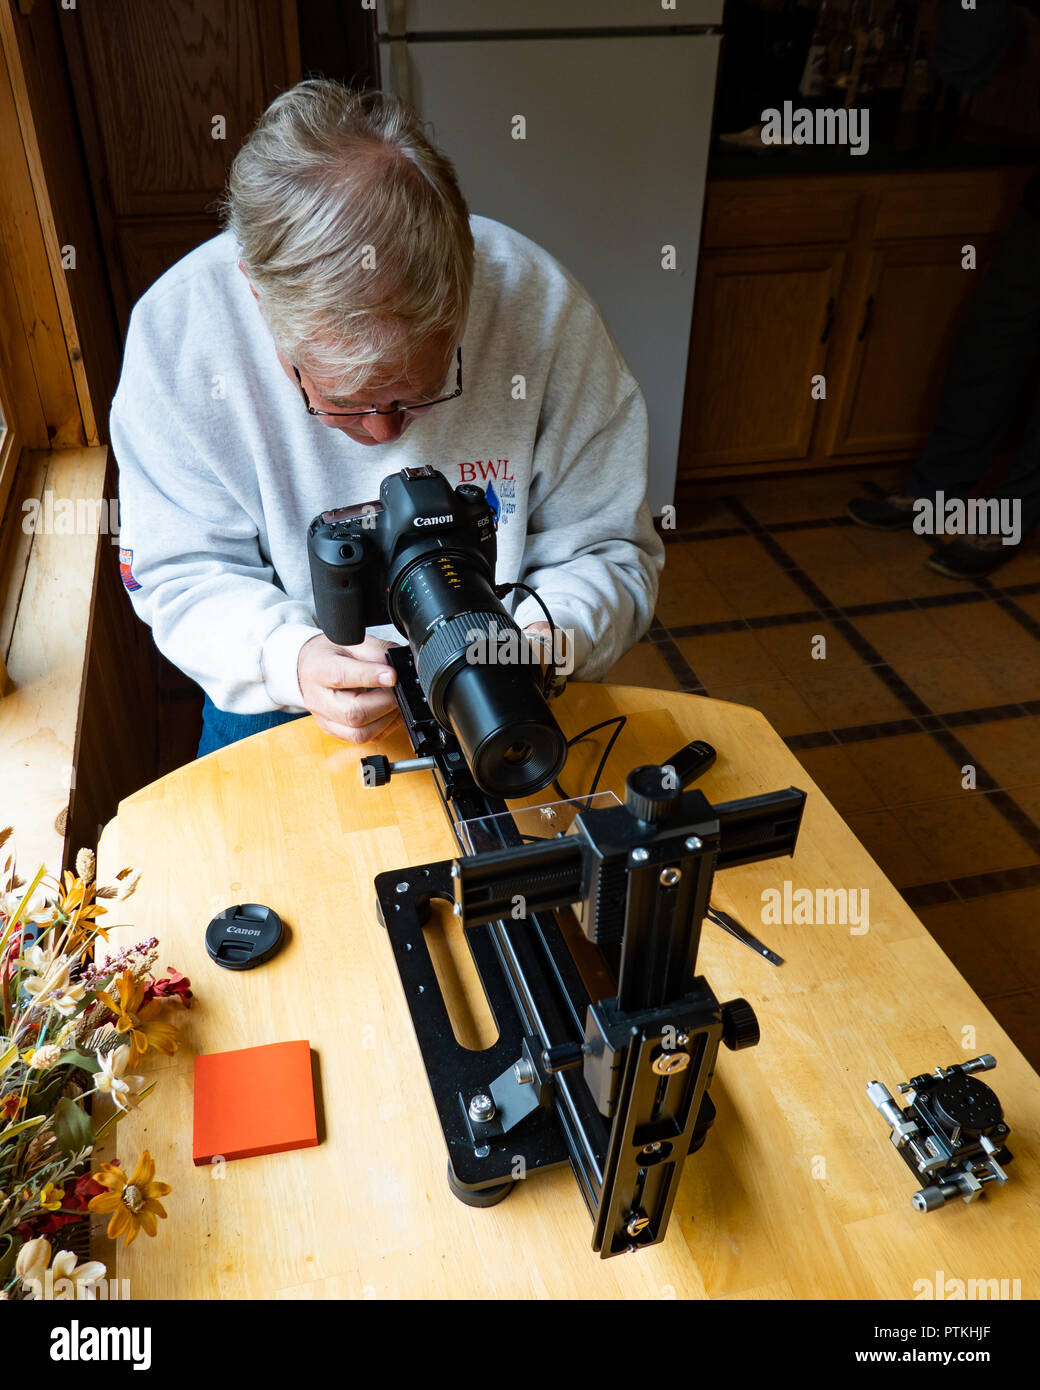 A senior photographer demonstrating techniques for photographing small insects with a Canon digital camera and lens. Stock Photo